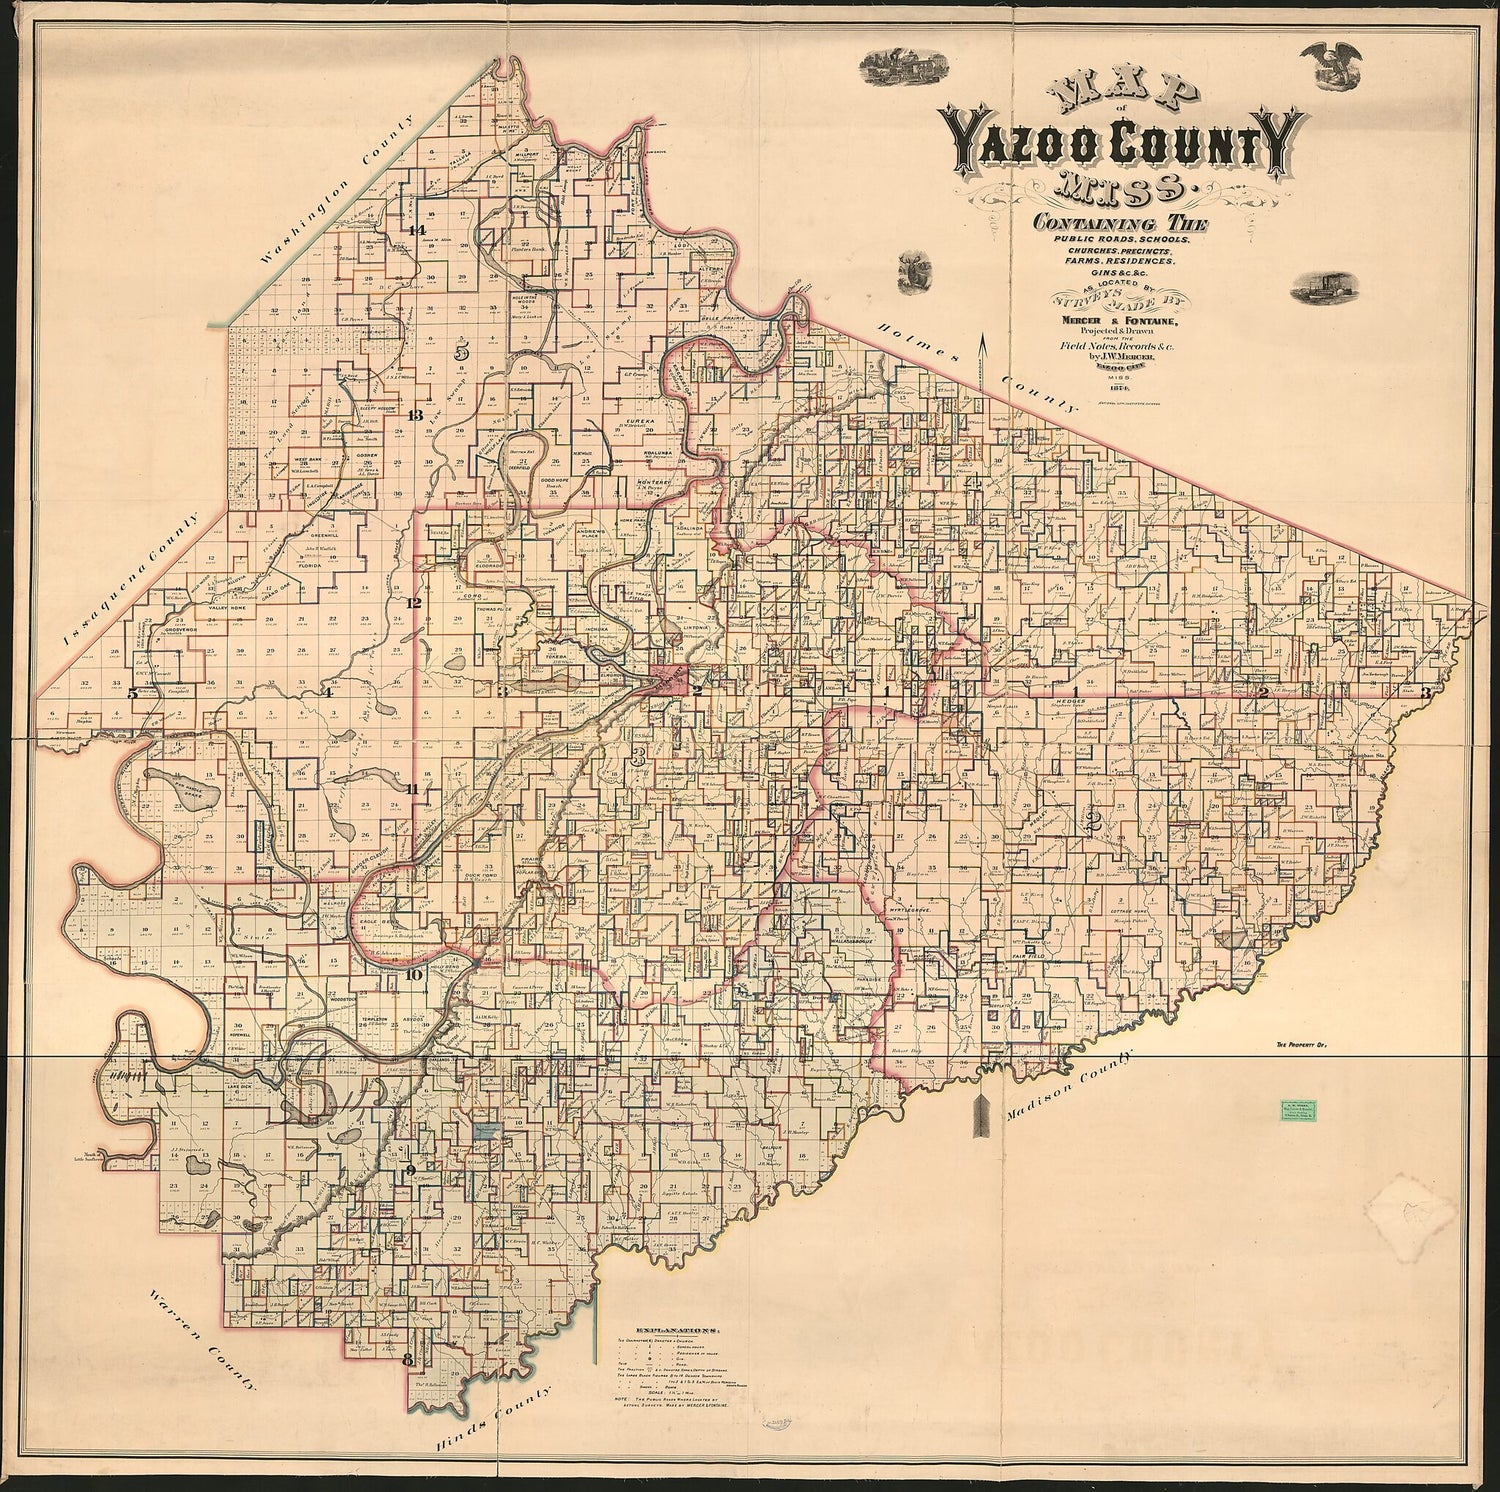 This old map of Map of Yazoo County, Mississippi : Containing the Public Roads, Schools, Churches, Precincts, Farms, Residences, Gins &amp;c. &amp;c. (Yazoo County, Mississippi) from 1874 was created by J. W. Mercer in 1874